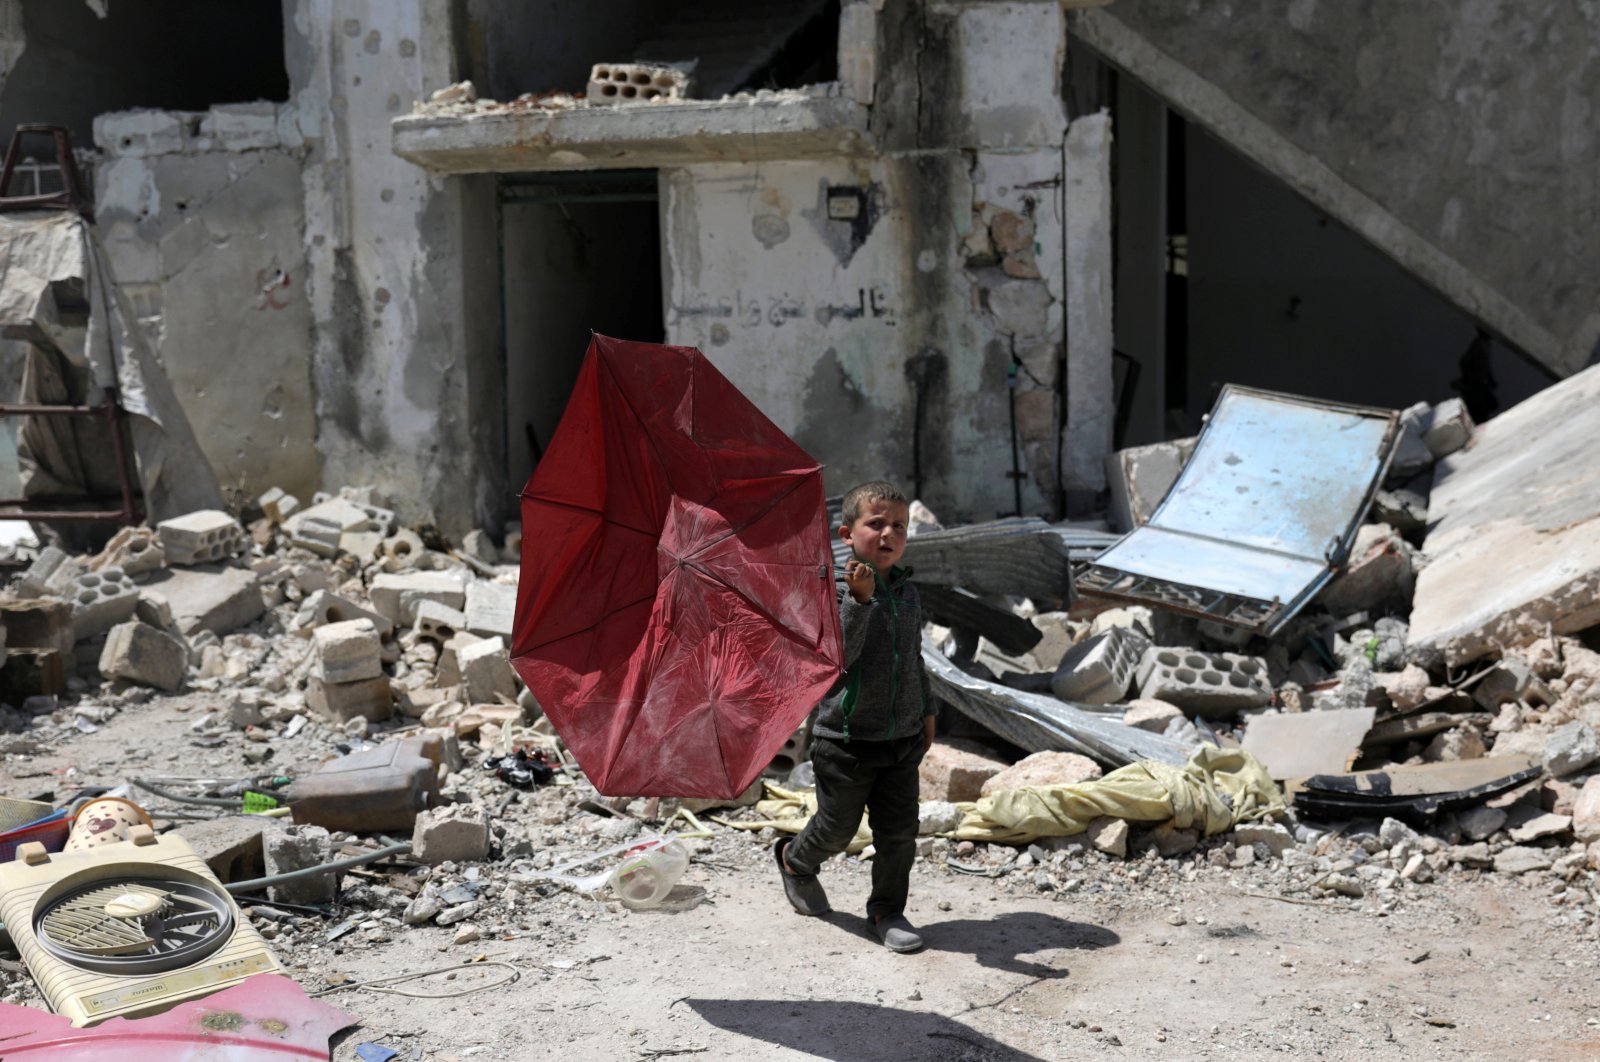 A boy carries a broken umbrella as he walks past a damaged building in the rebel-held town of Nairab, in northwest Syria's Idlib region, Syria, Friday, April 17, 2020. REUTERS